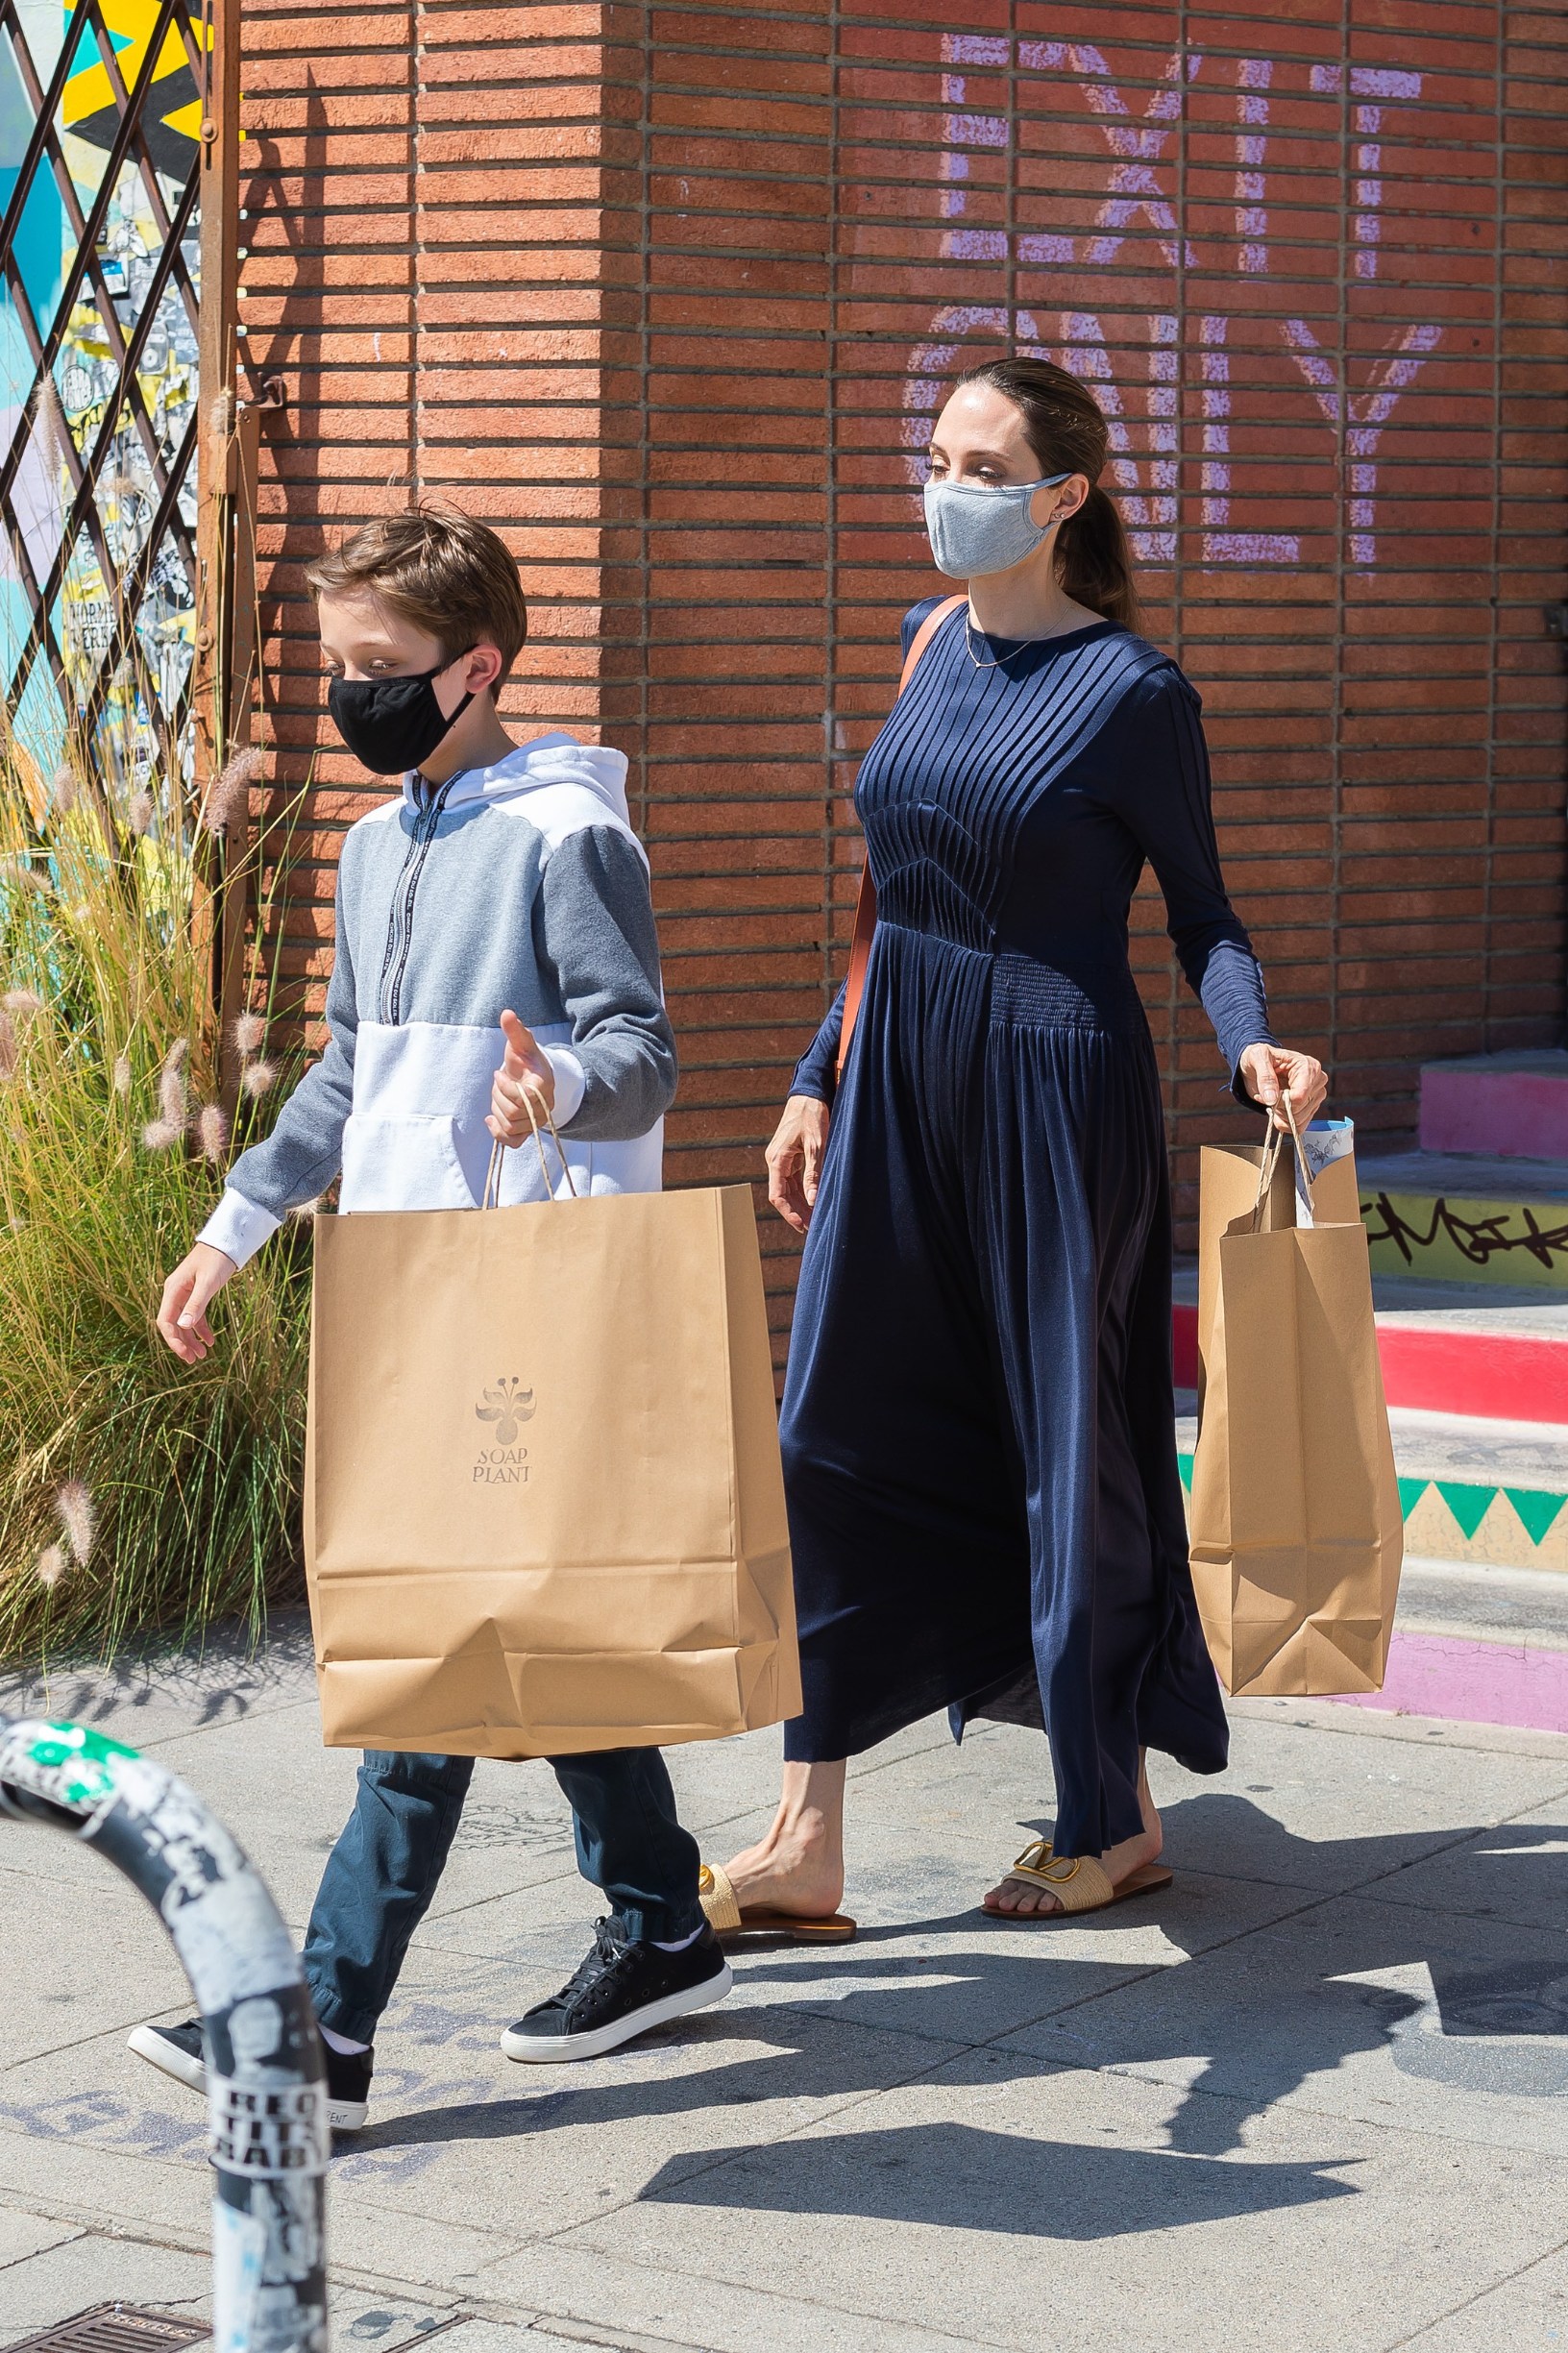 EXCLUSIVE: Angelina Jolie and her son Knox go to Wacko and Blue Rooster art supplies.
11 Jul 2020,Image: 542098218, License: Rights-managed, Restrictions: World Rights, Model Release: no, Credit line: Mr. E /P &P/ MEGA / The Mega Agency / Profimedia